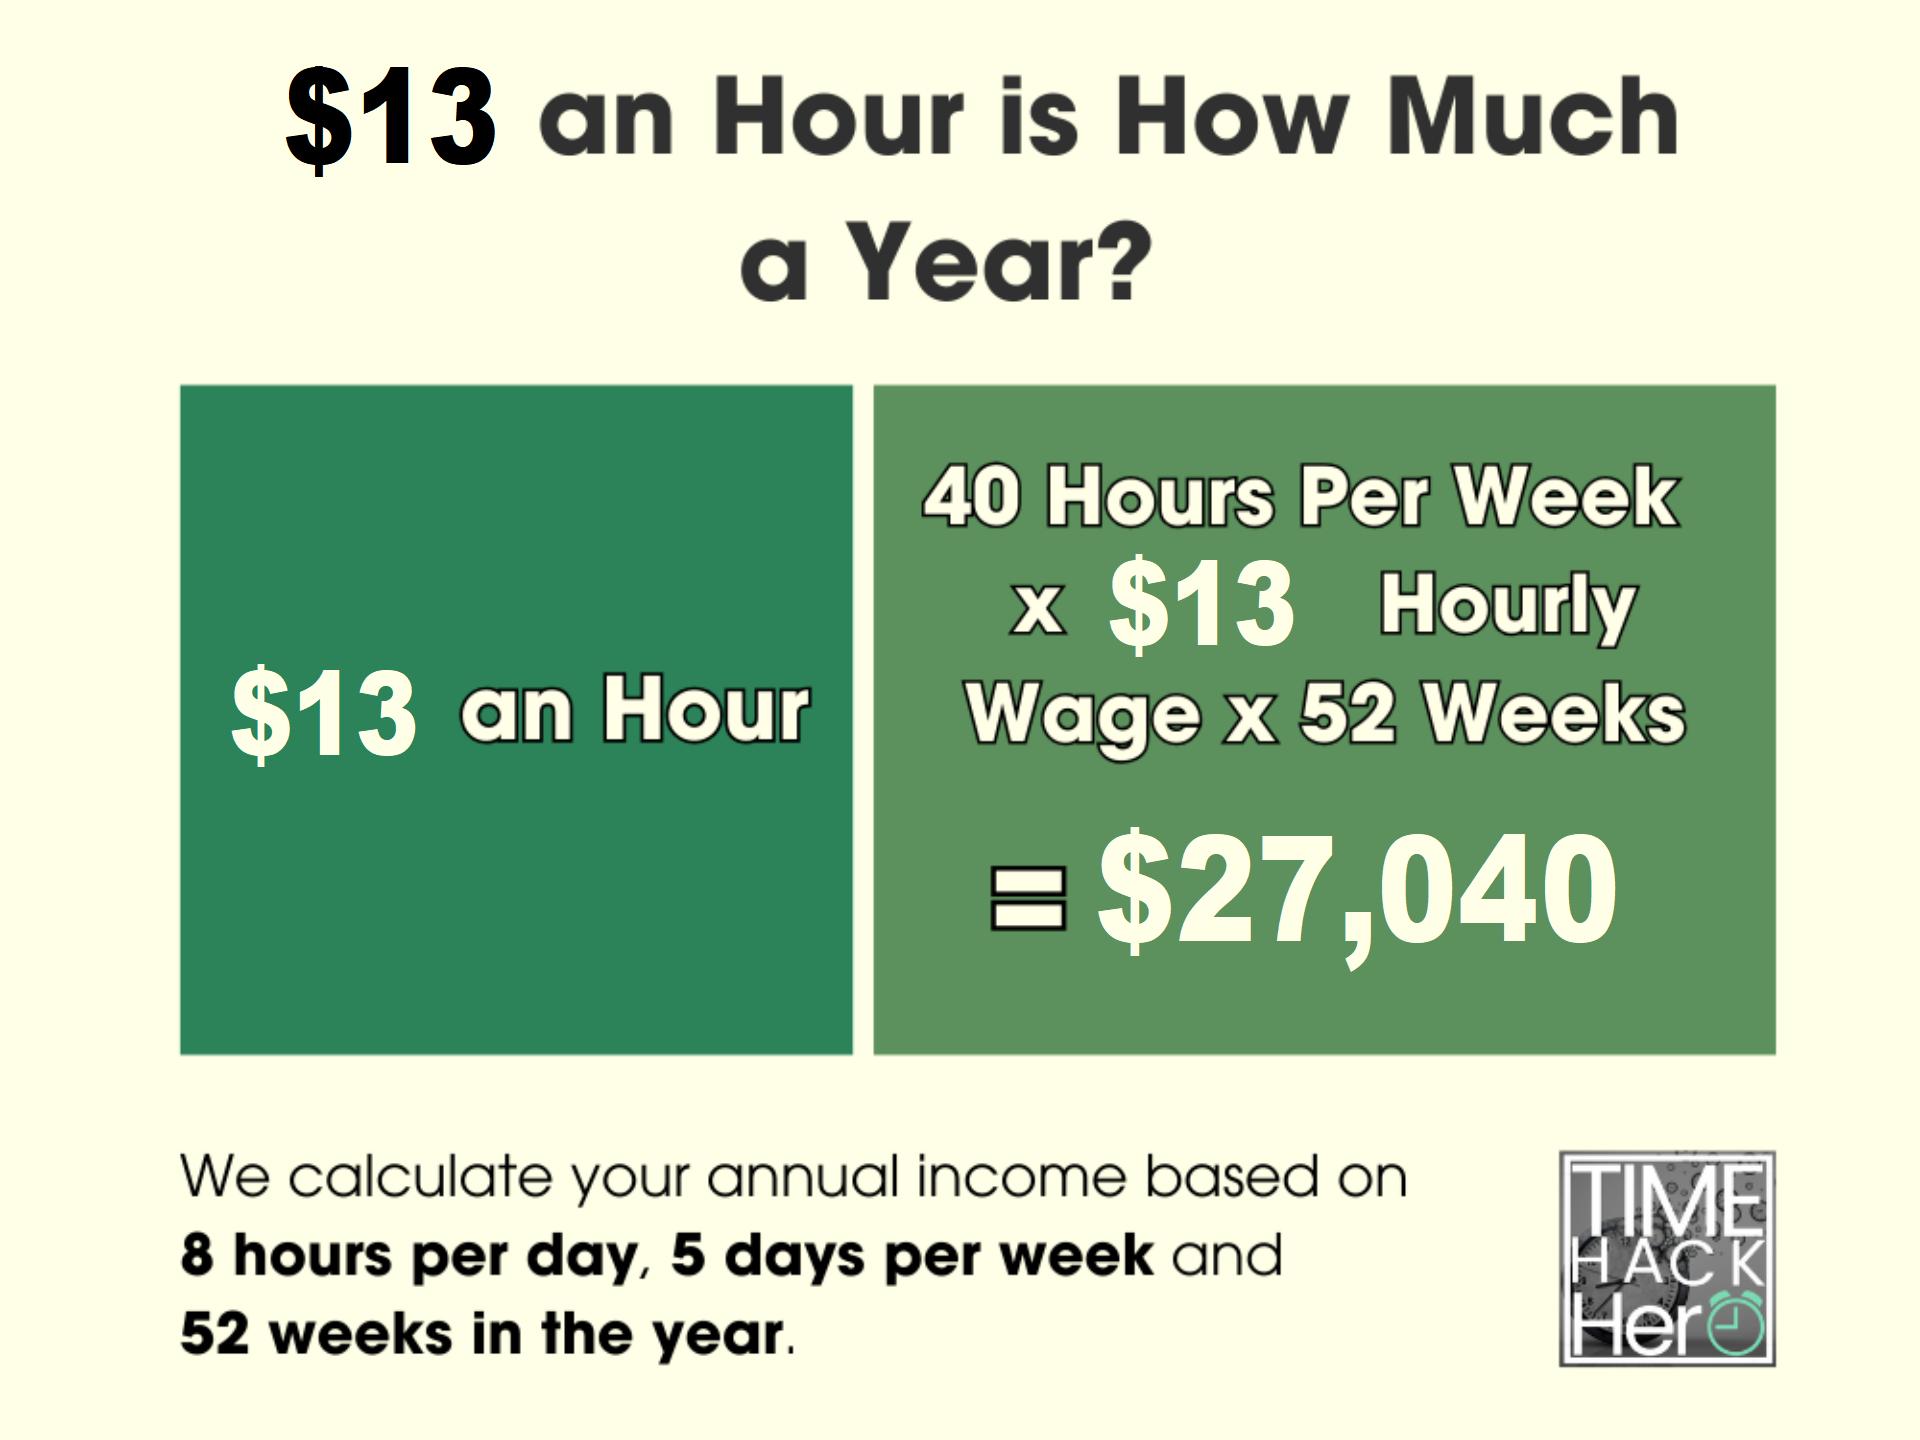 $13 an Hour is How Much a Year